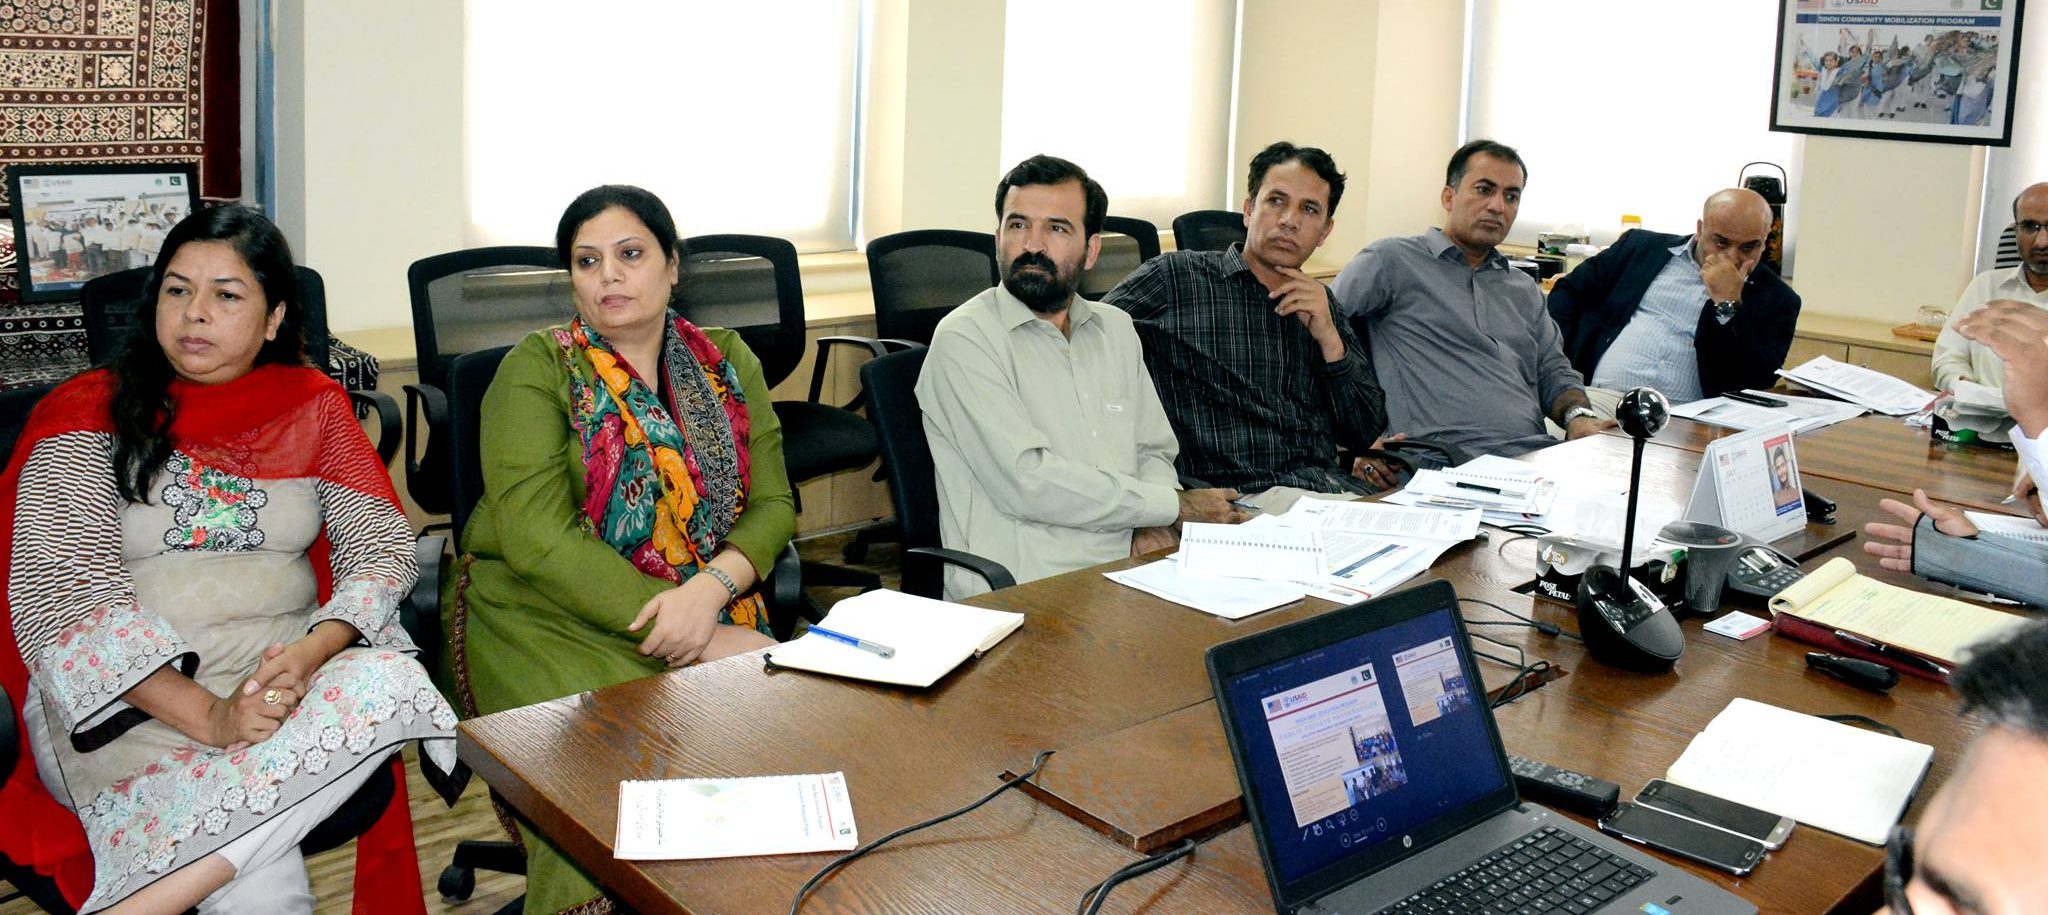 Balochistan Officials Draw From CMP’s Education Reform Expertise